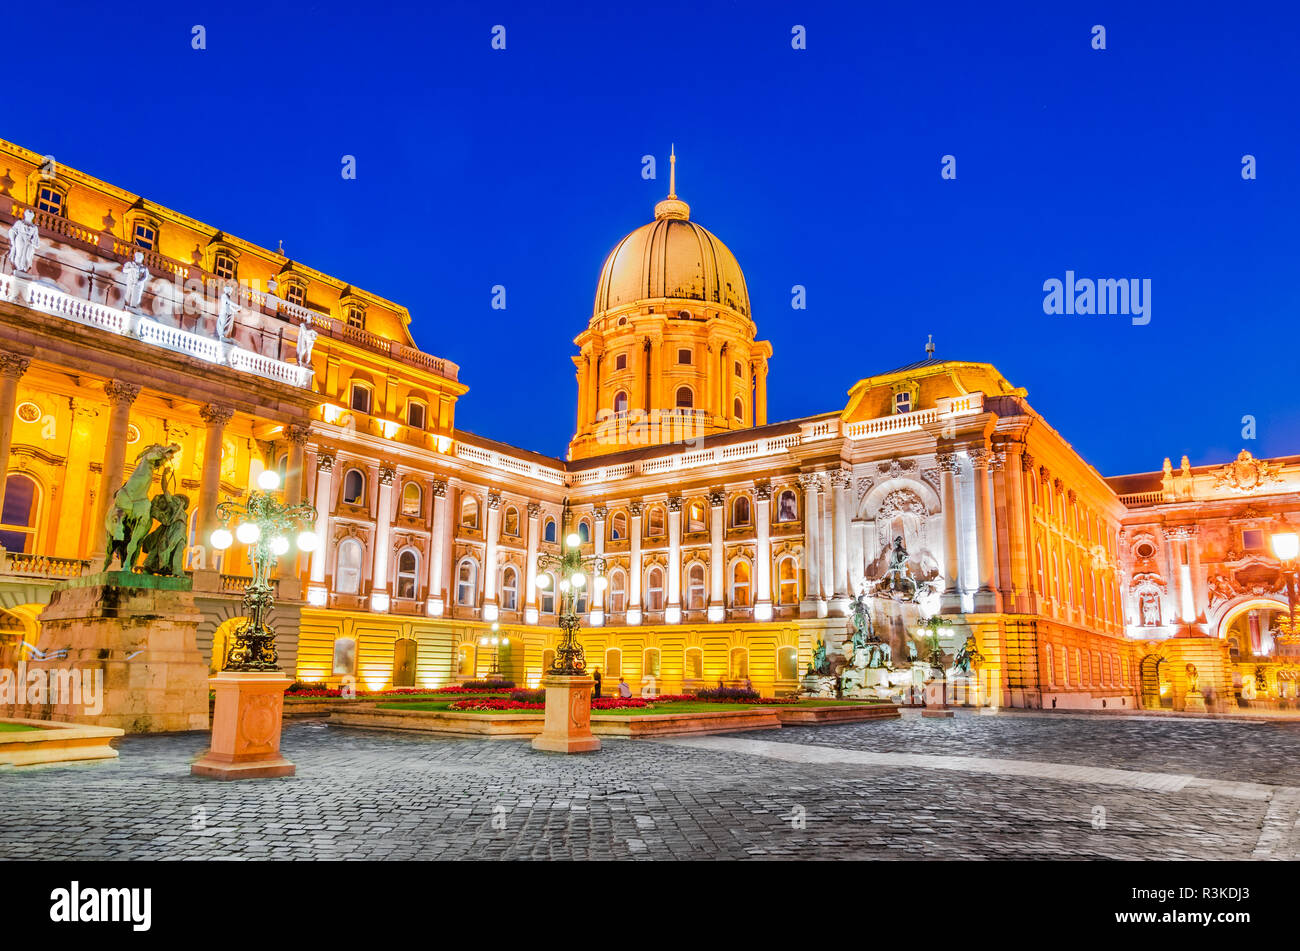 Budapest, Hungary. Buda Castle built on Castle Hill by Magyar kings. Stock Photo